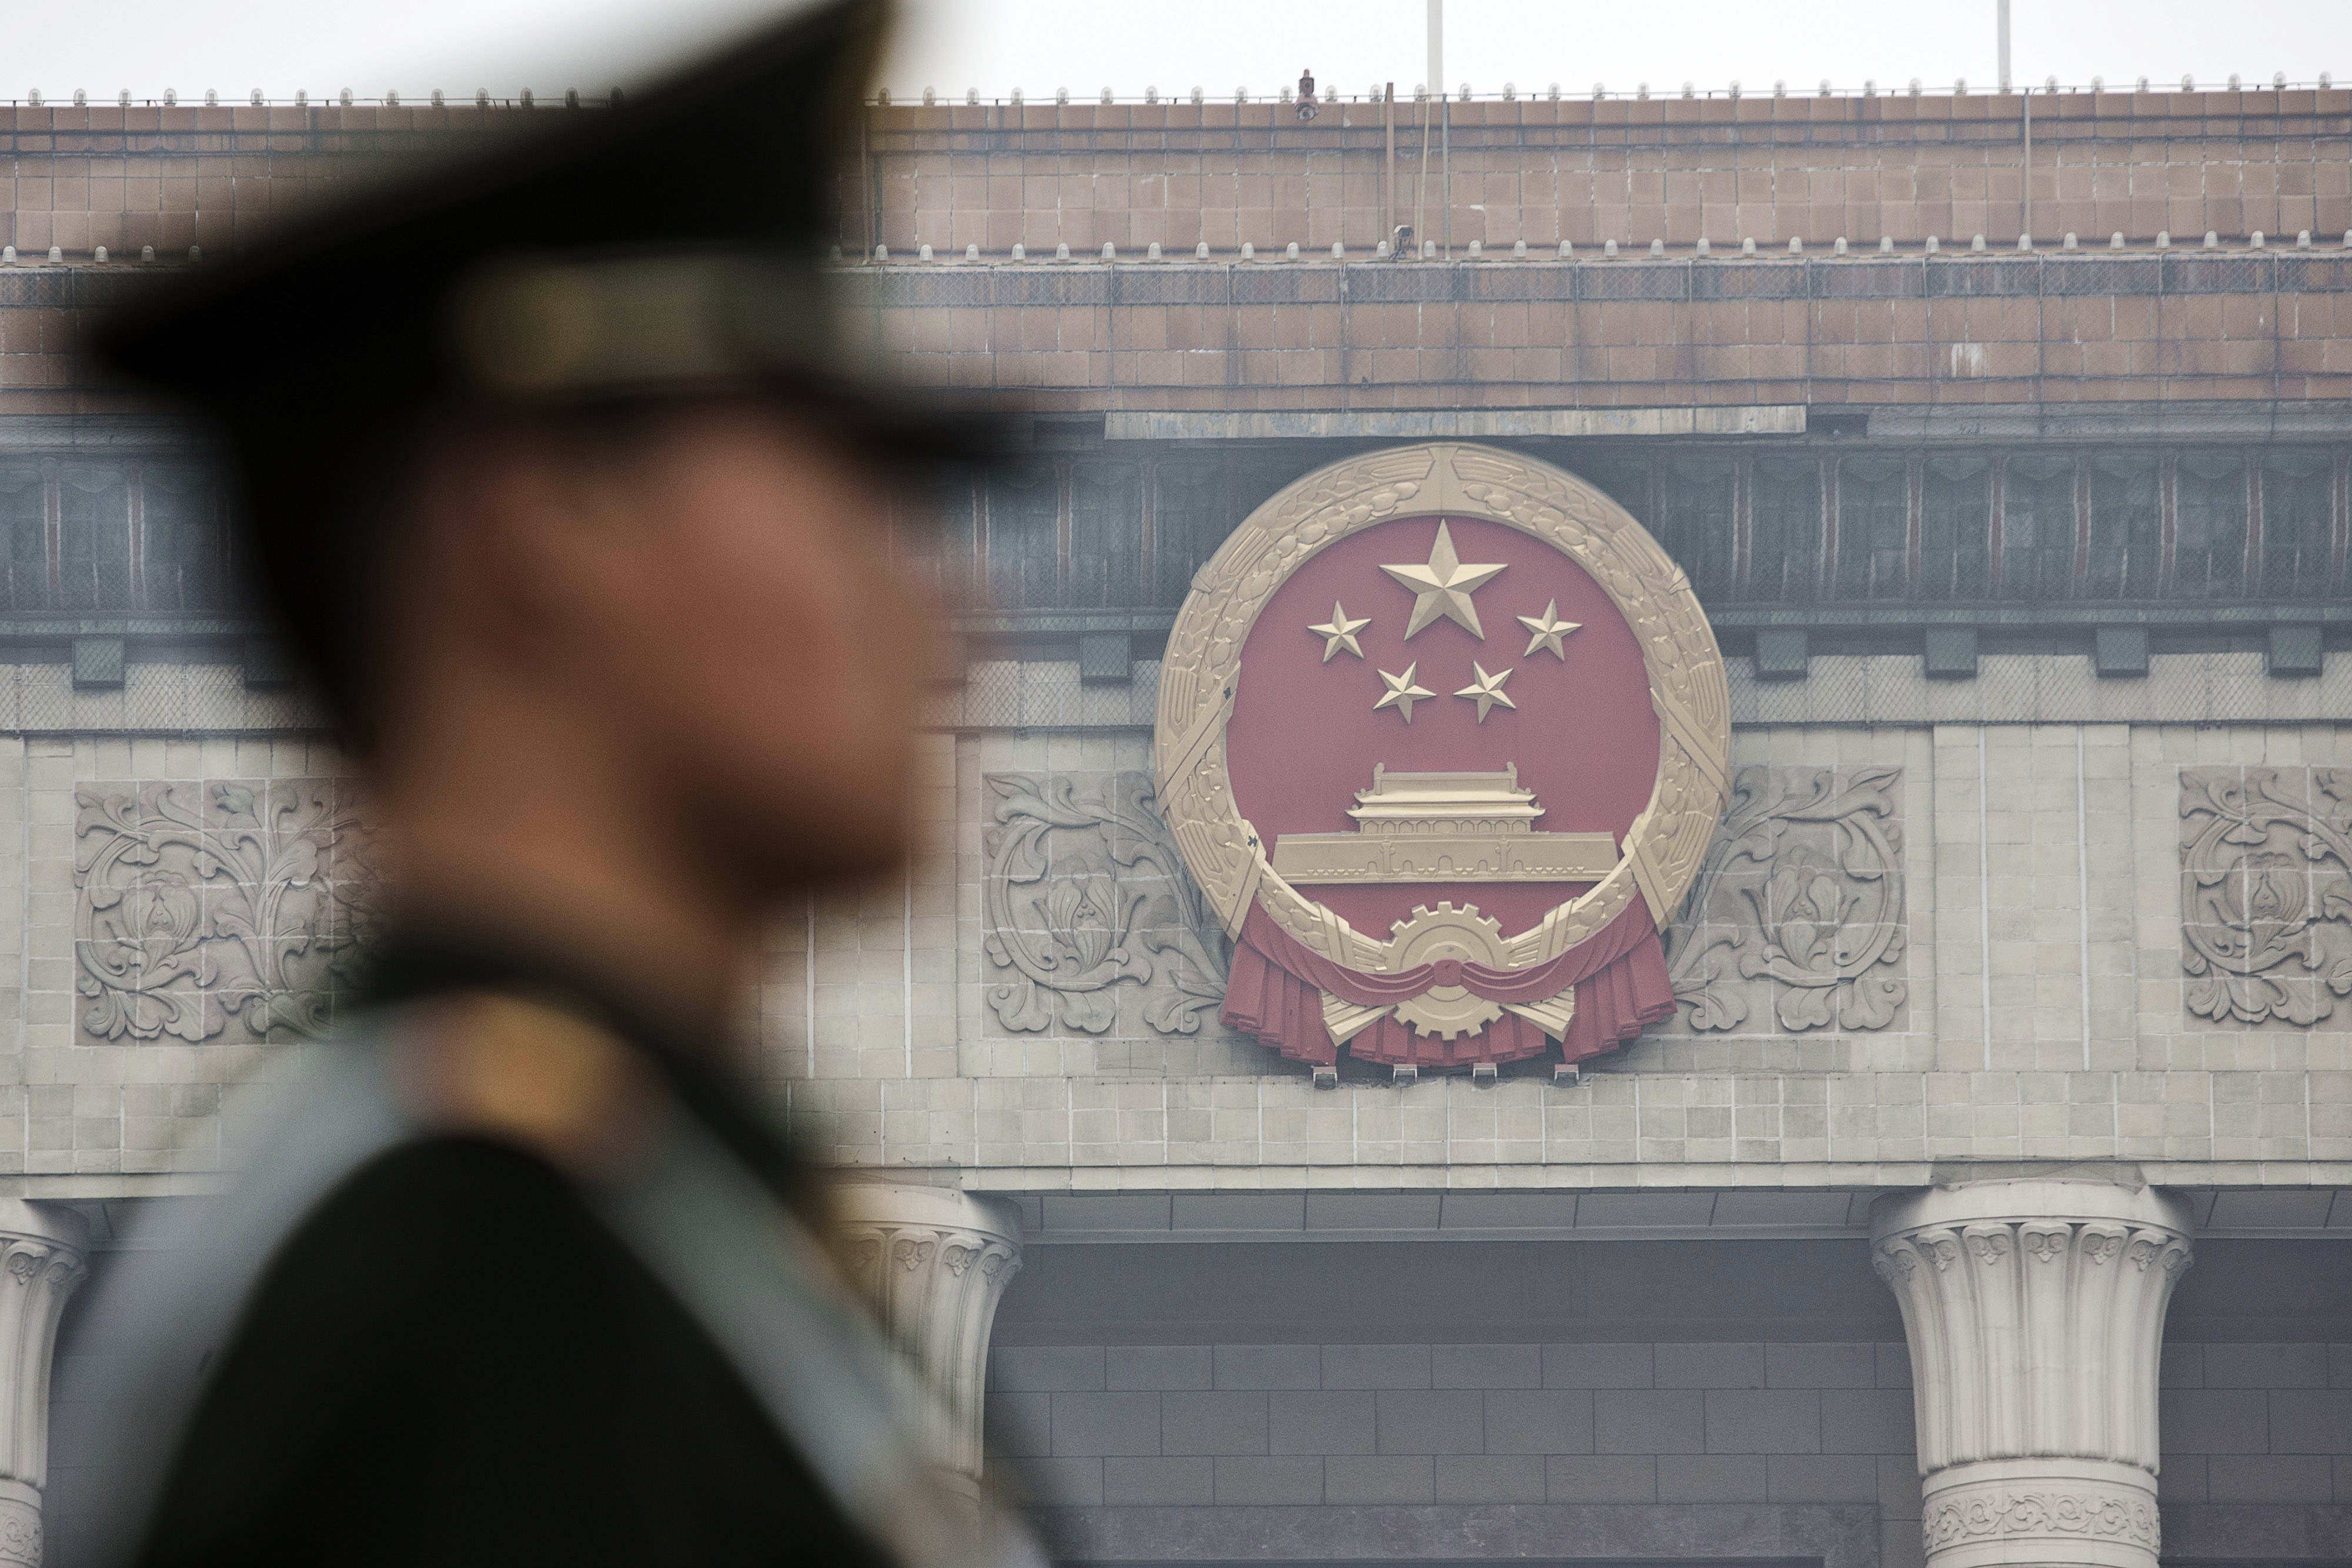 A paramilitary police officer stands guard in front of the Great Hall of the People in Beijing, China, on March 4, 2016.